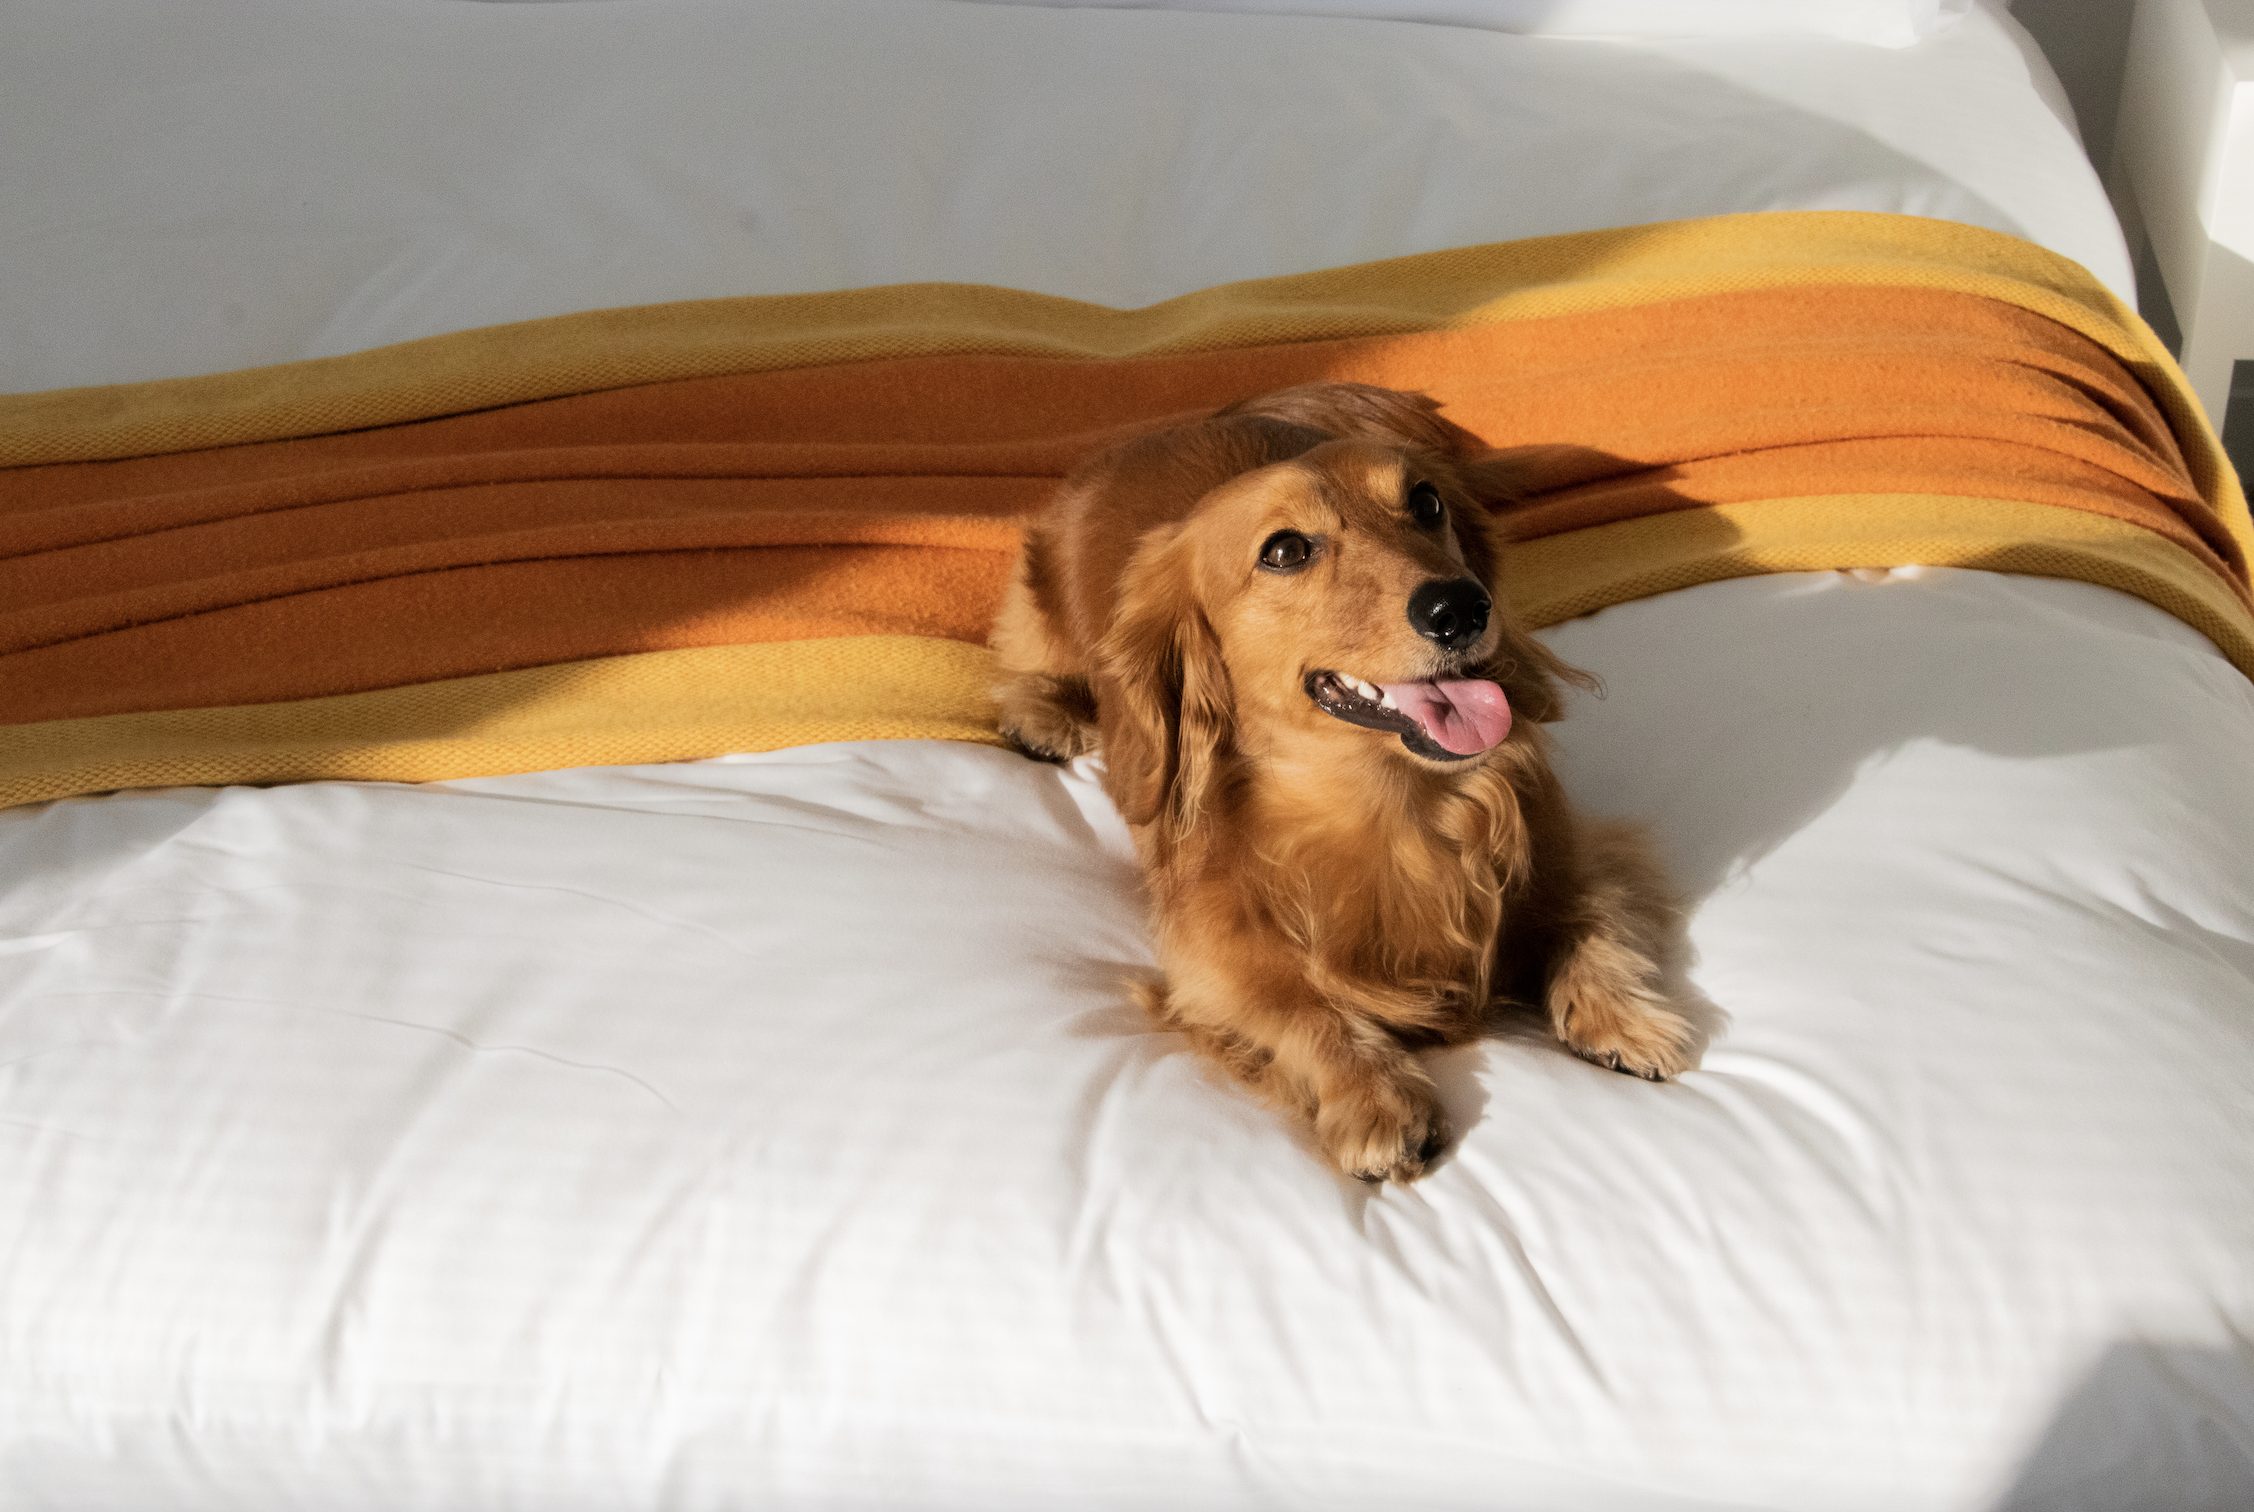 a cute medium sized dog with a golden coat sits on a bed topped with an orange and yellow striped blanket